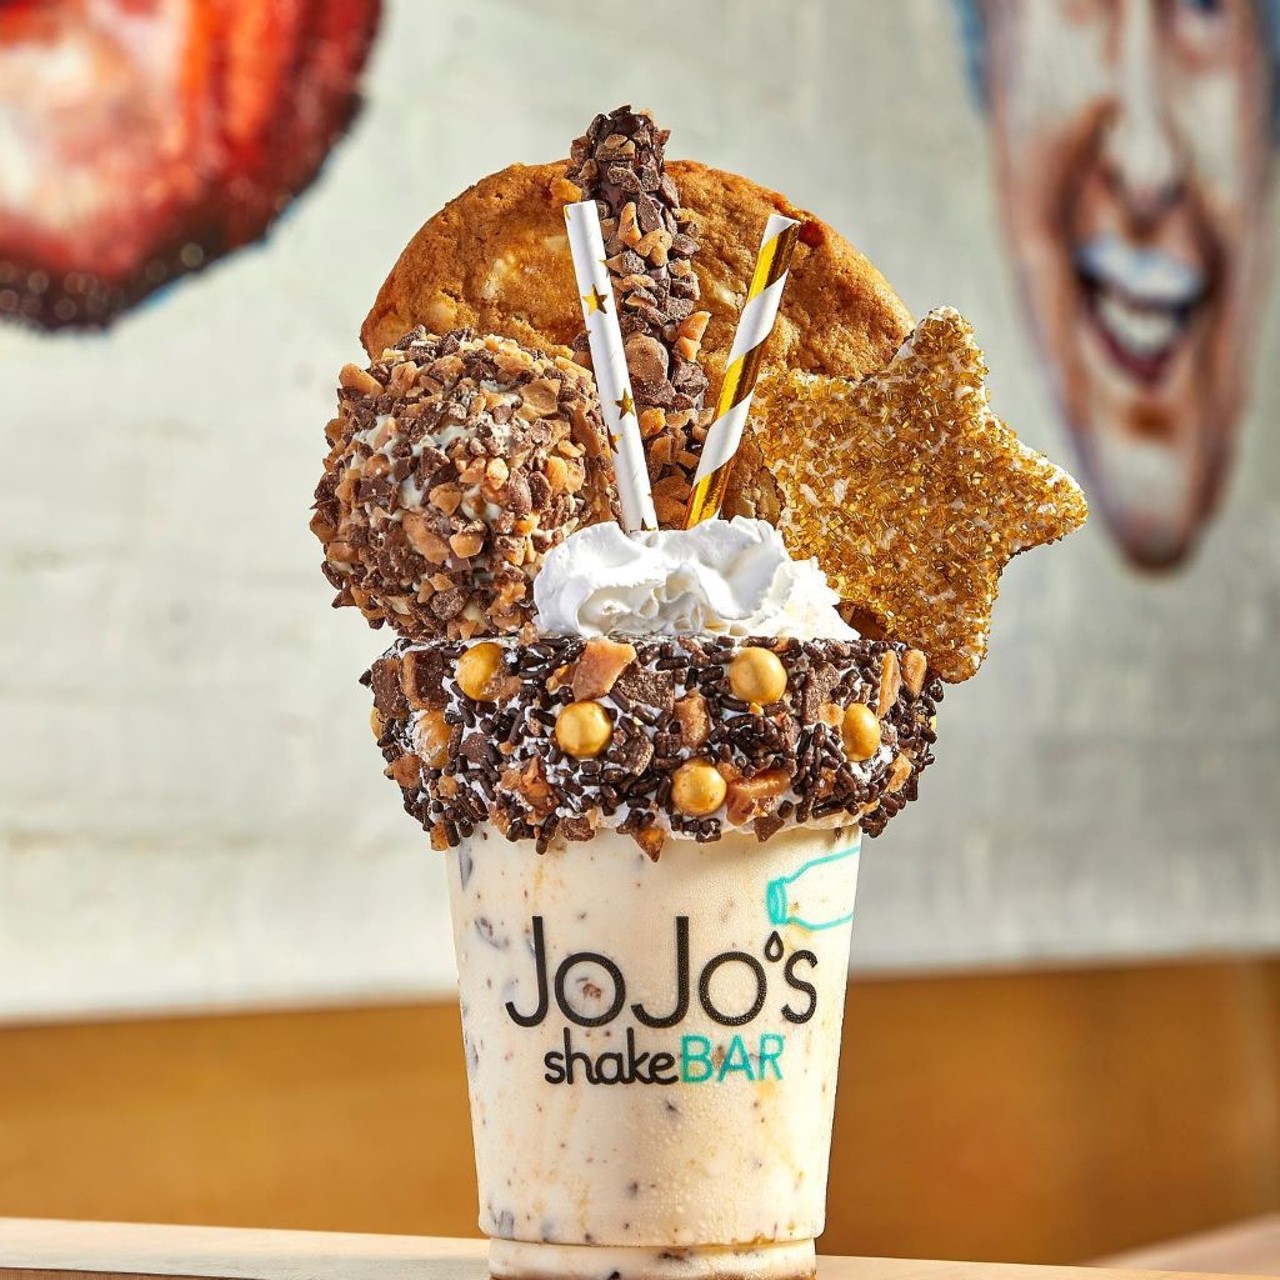 JoJo&#146;s Shake Bar 
Coming soon
Chicago&#146;s most outrageous milkshake bar is coming to International Drive. Depending on the holiday, there&#146;s a rotation of milkshake flavors, but its mainstay classic, the Gold Digger, is the one to try. It&#146;s a caramel toffee shake topped with a gold star marshmallow, toffee pretzel and a white chocolate macadamia nut cookie. 
Photo via JoJo&#146;s Shake Bar/Facebook